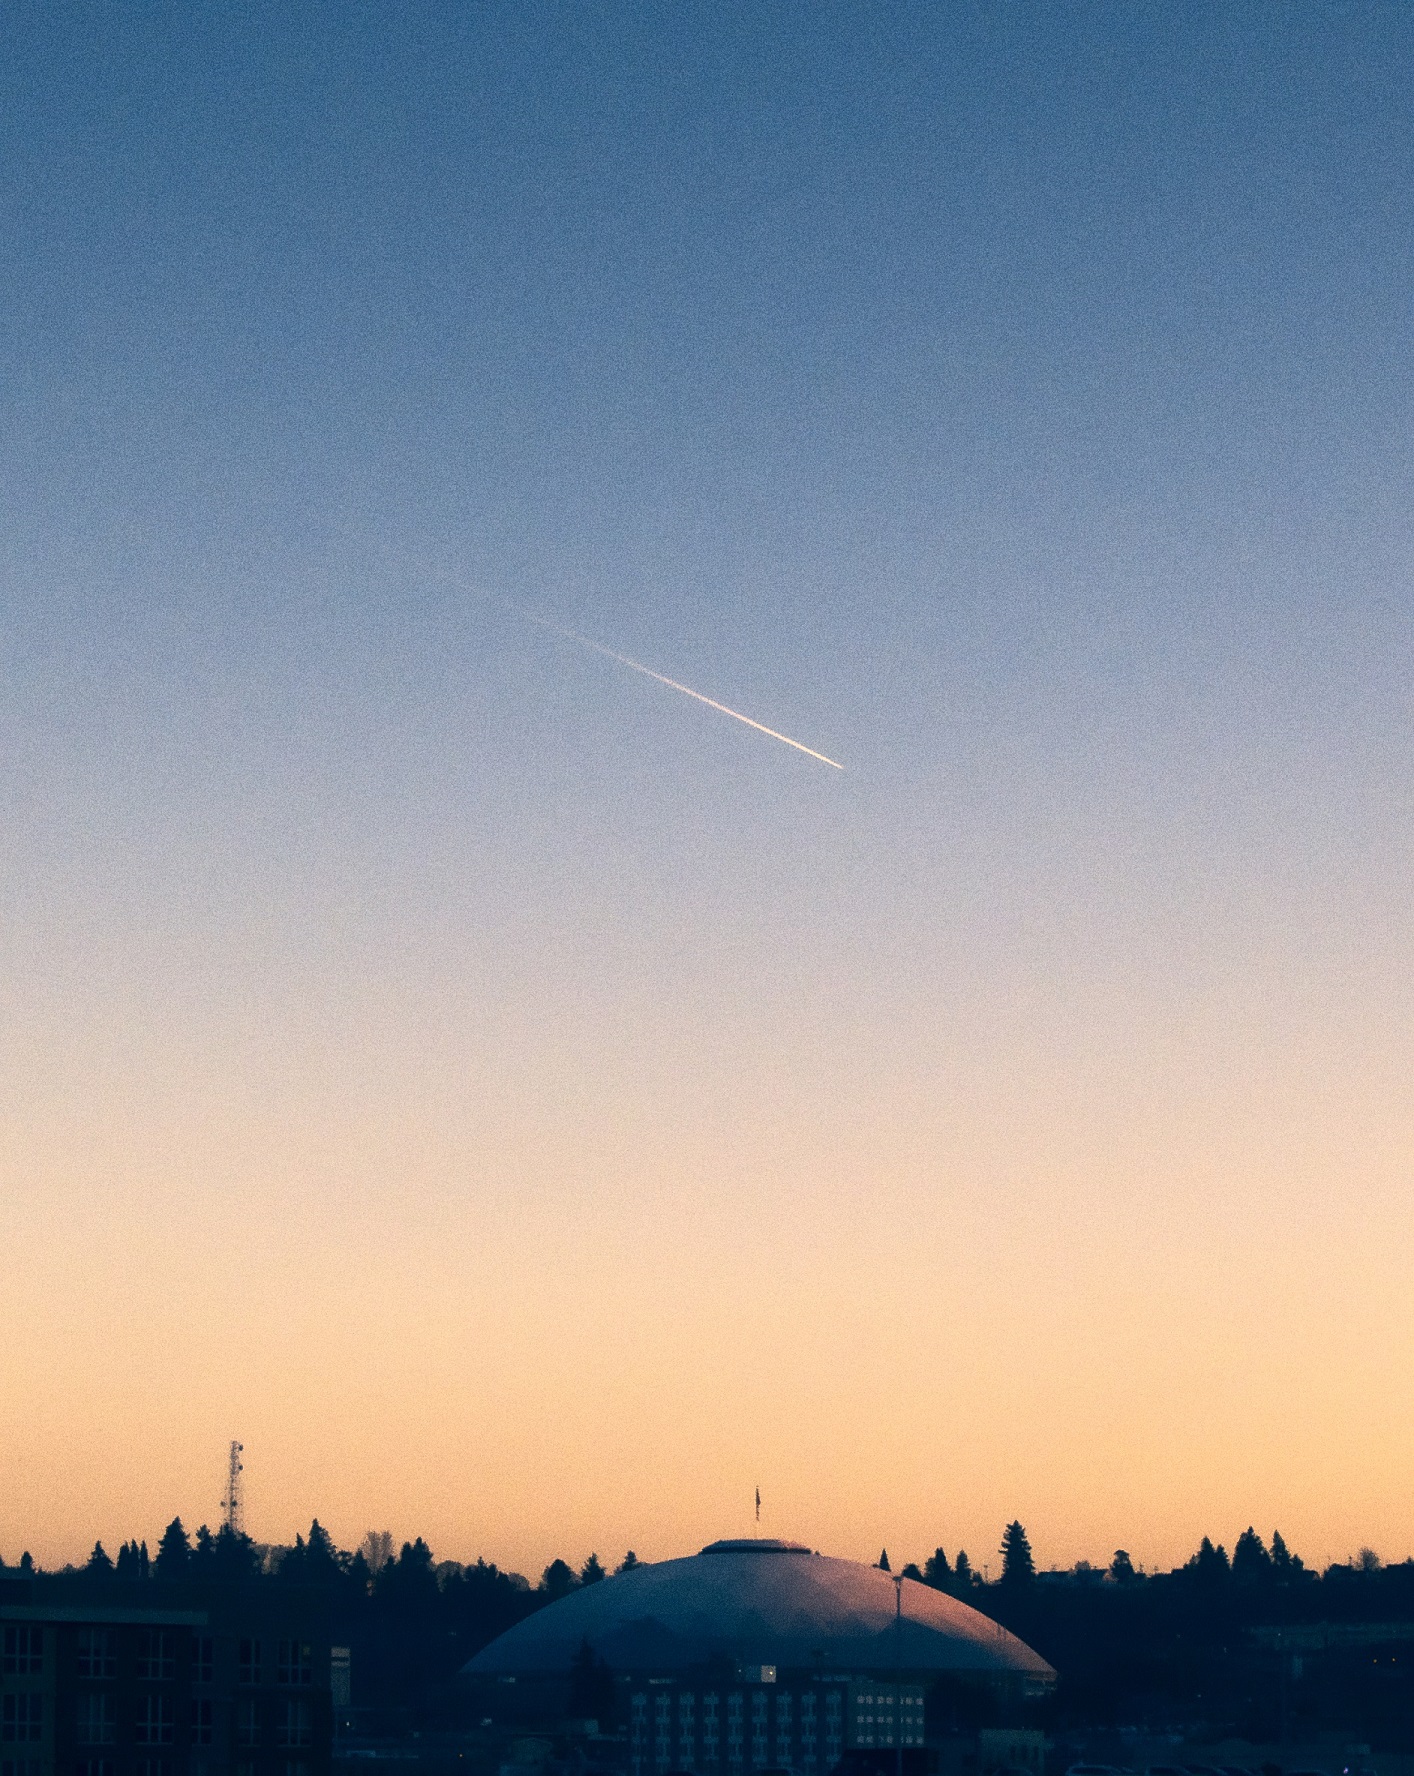 PICTURED: A horizontal photograph of the Tacoma Dome and the sky at sunset, with the latter taking up the upper four fifths of the image. The vapor trail of an air craft is in the sky.